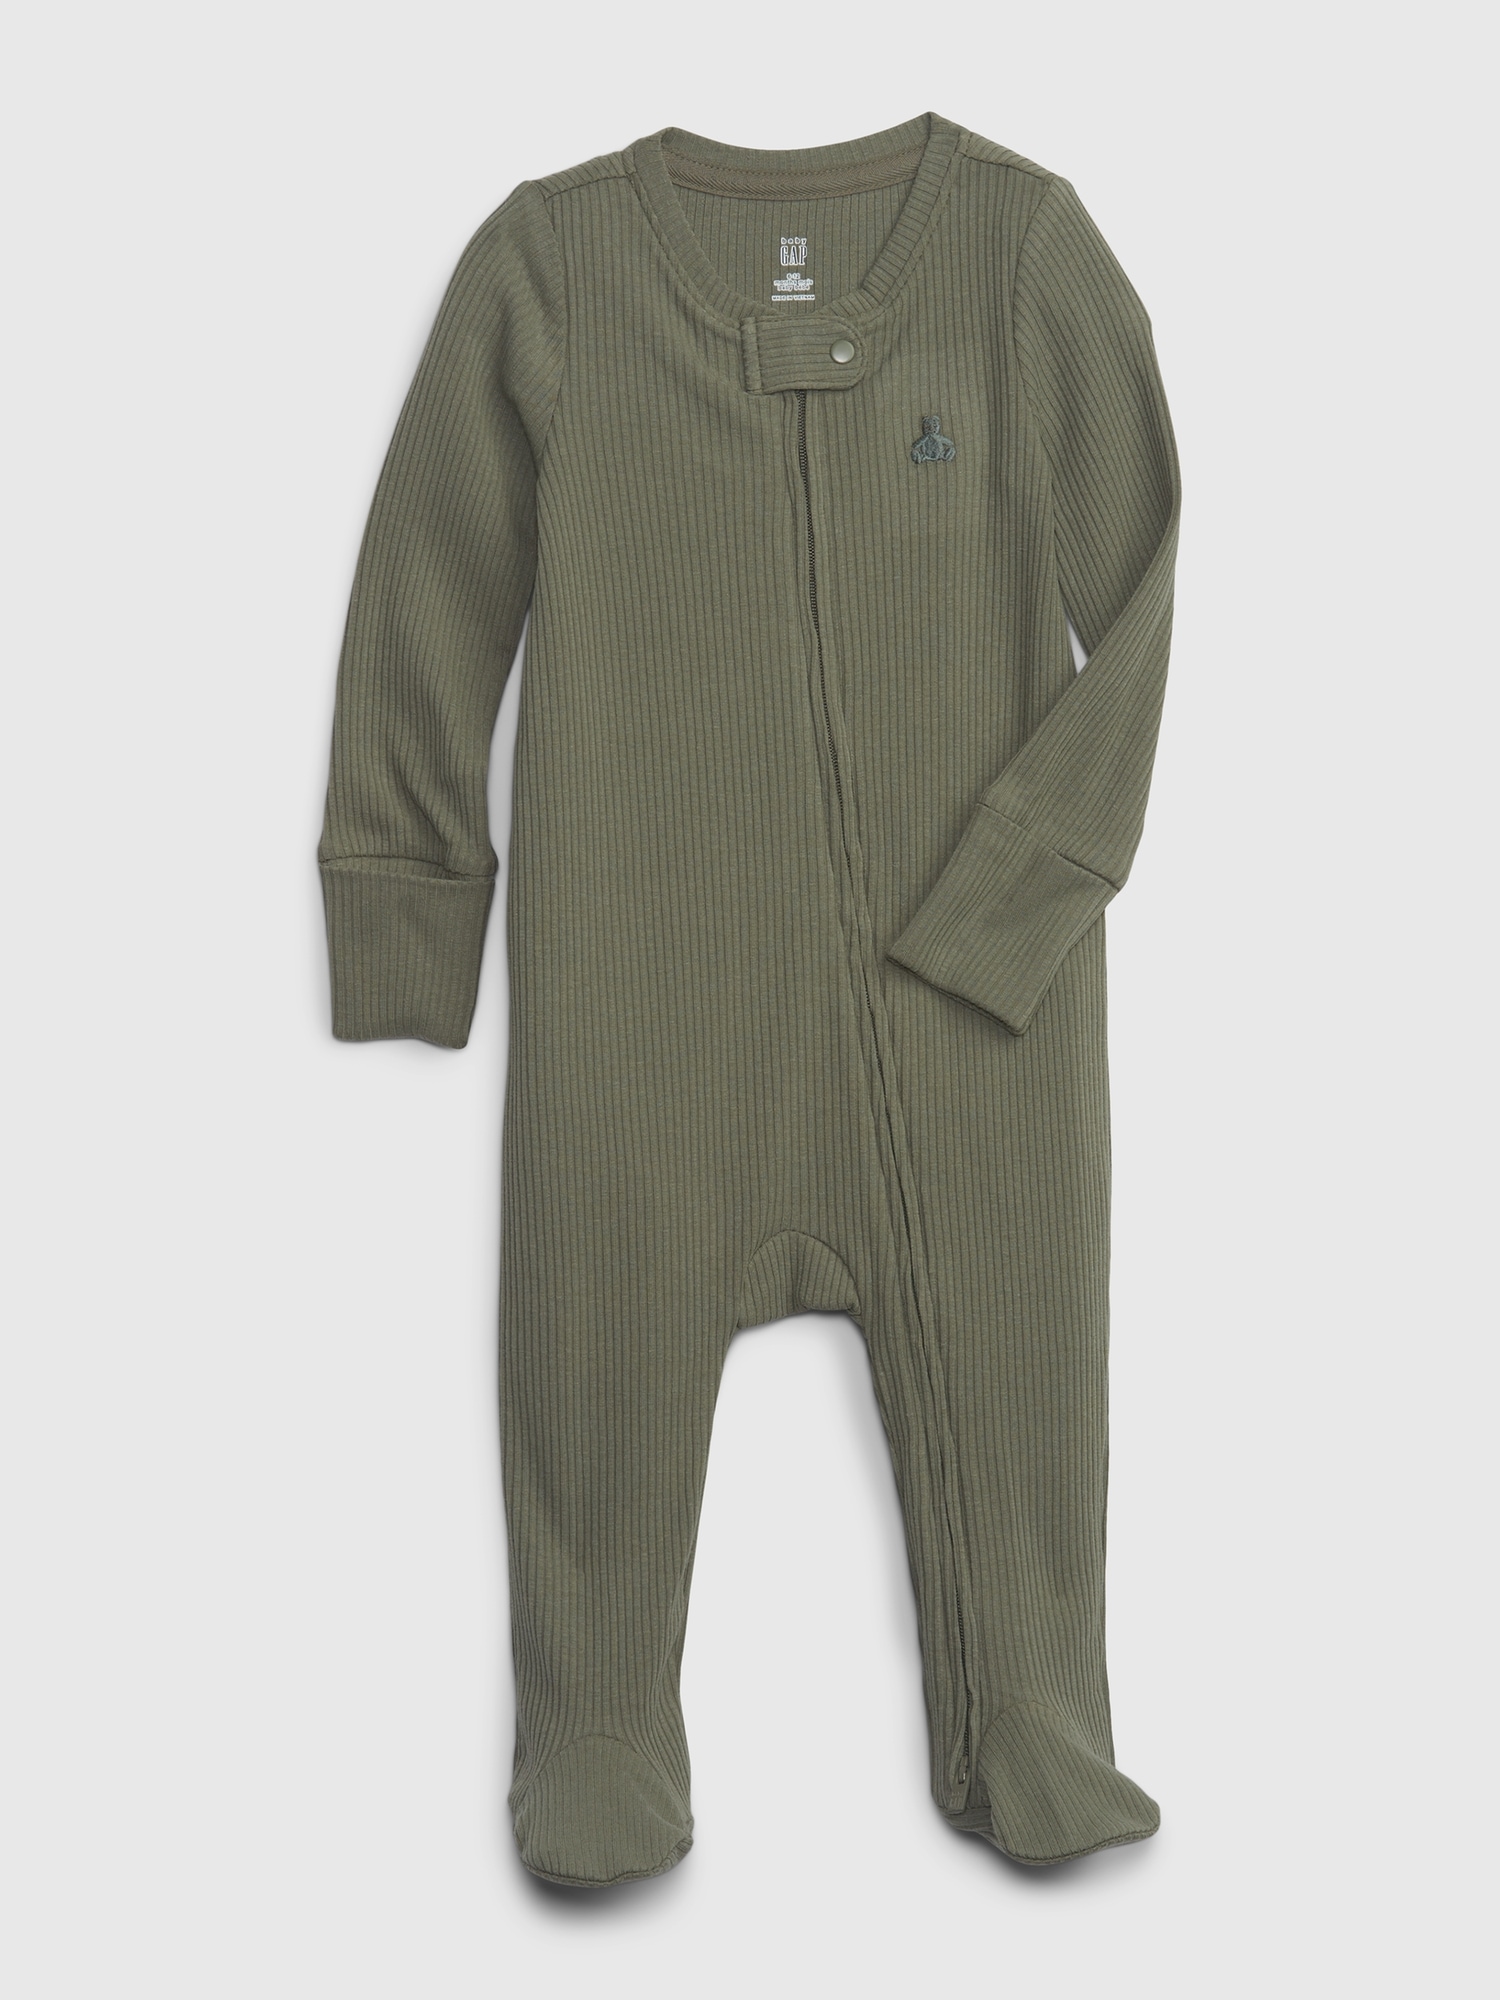 Gap Kids' Baby First Favorite Rib Footed One-piece In Green